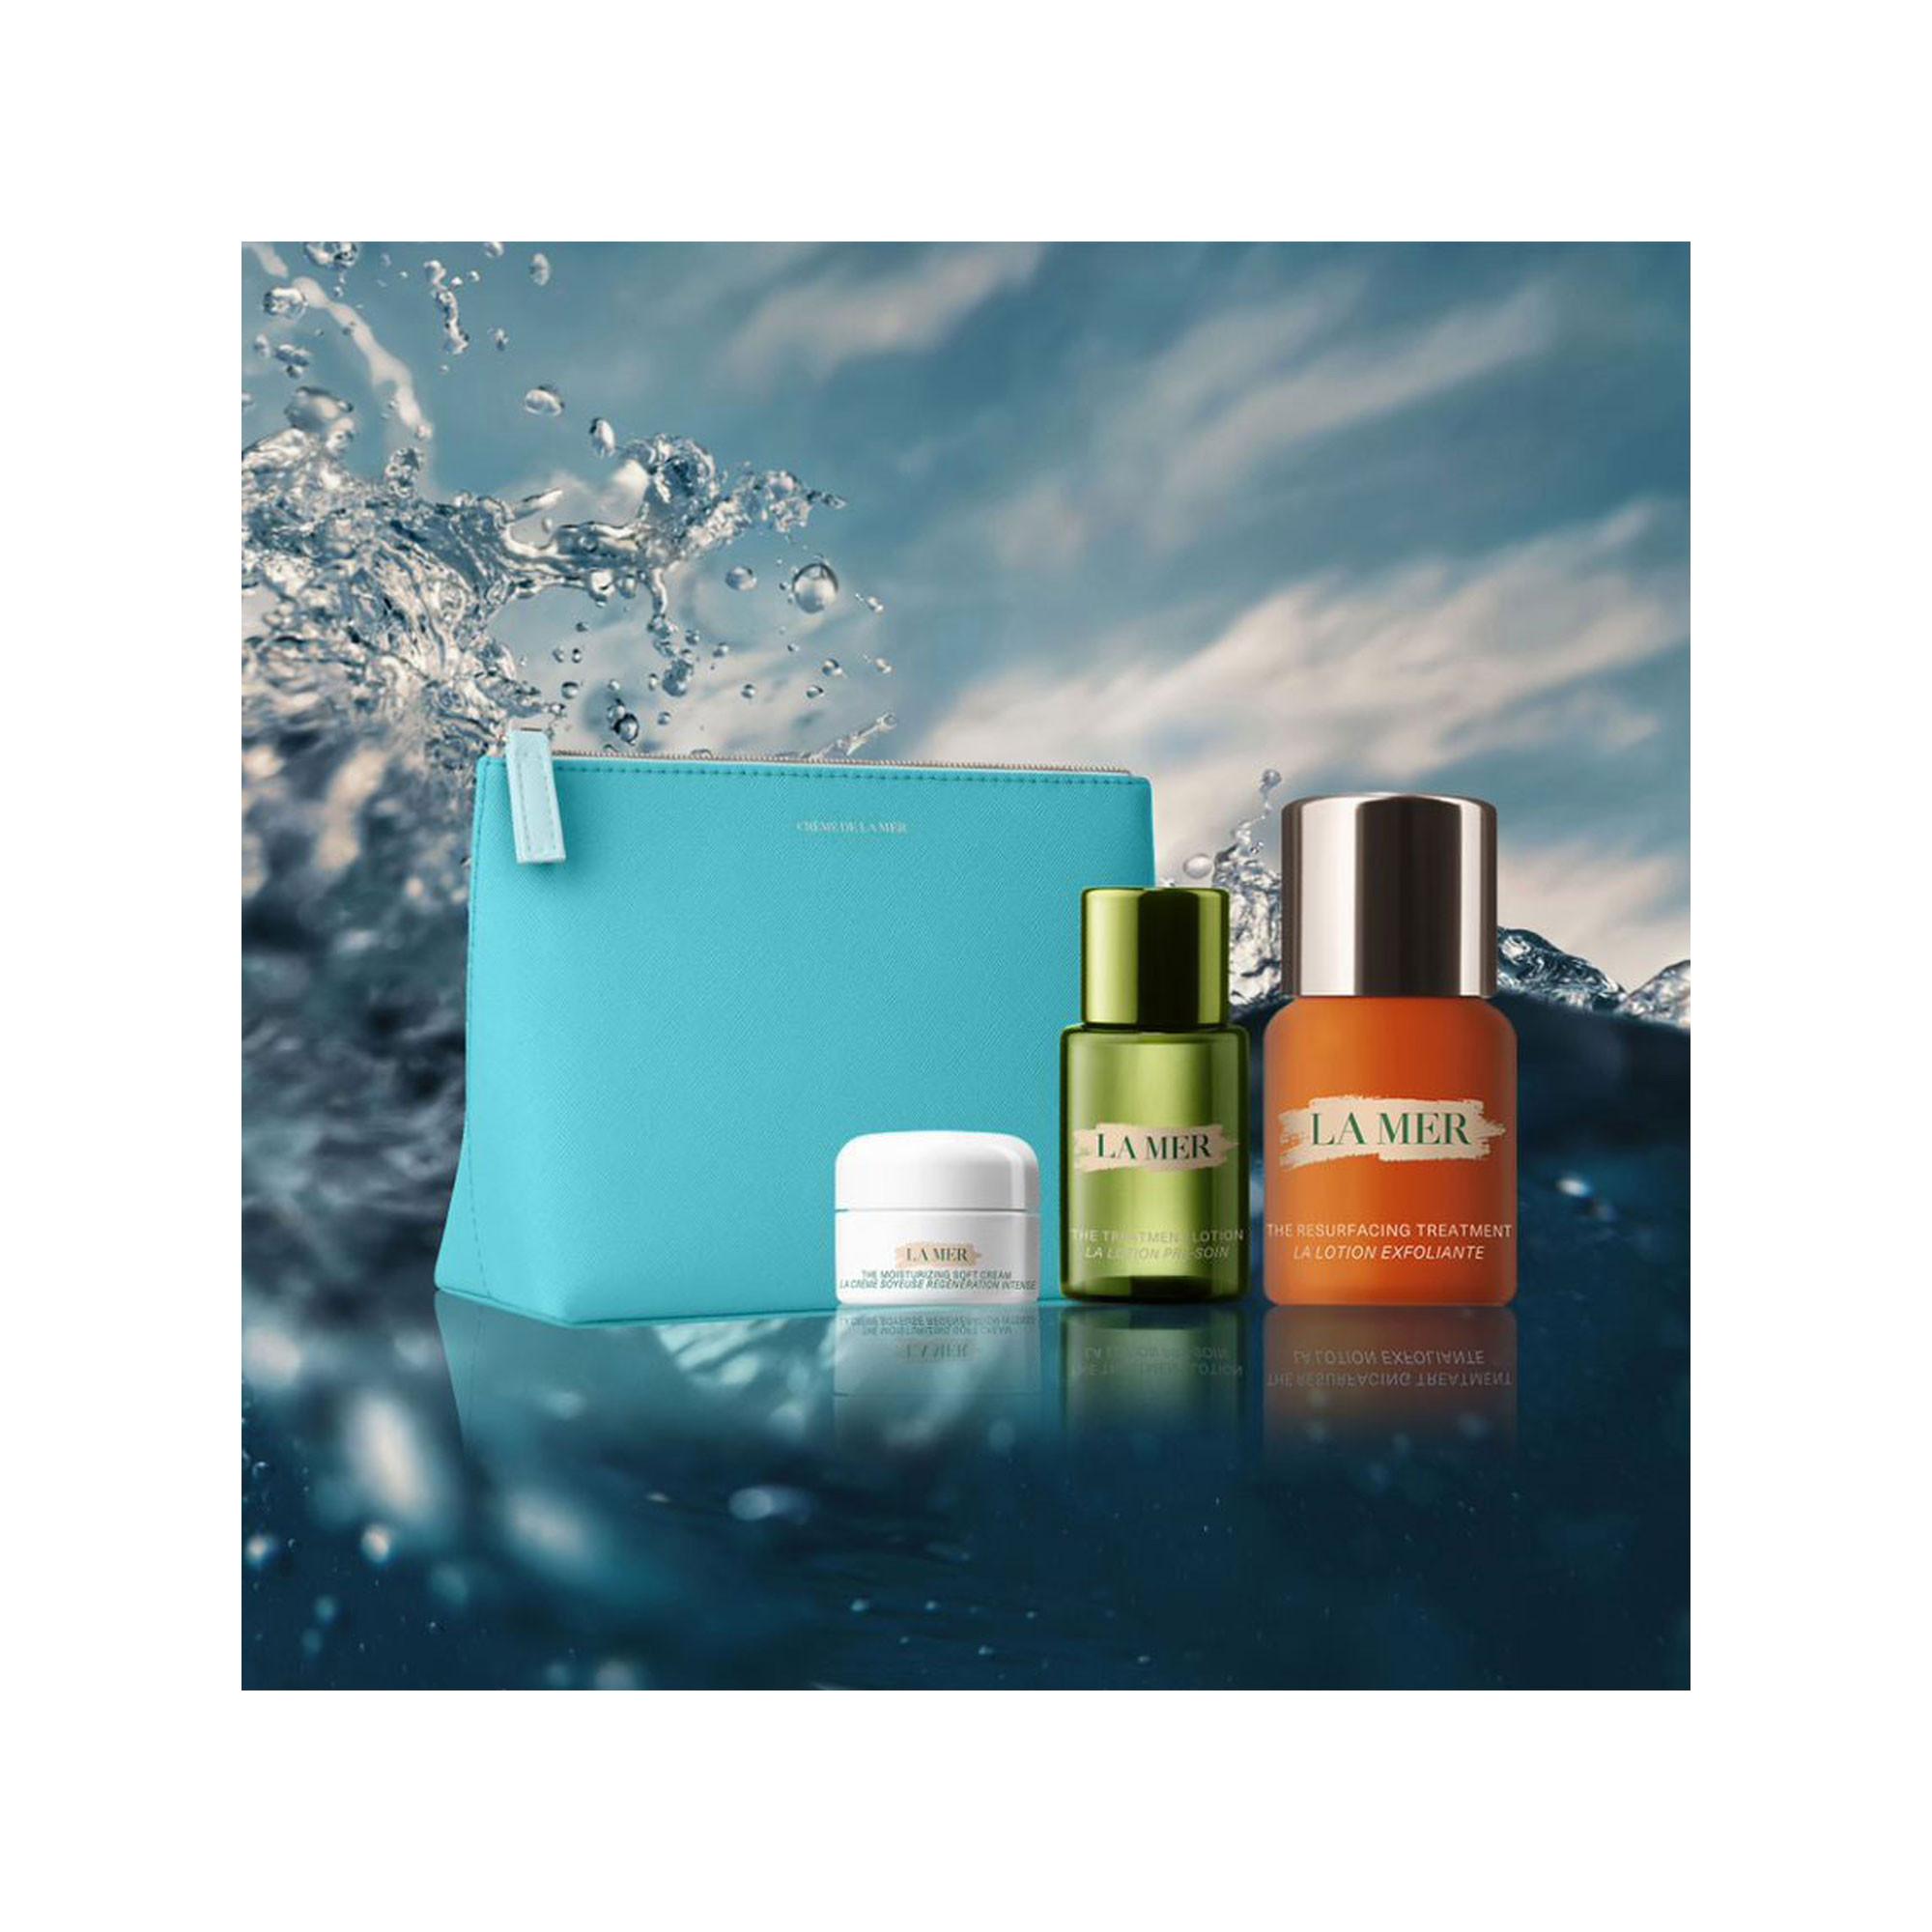 Spend €290 in La Mer and get a complementary gift